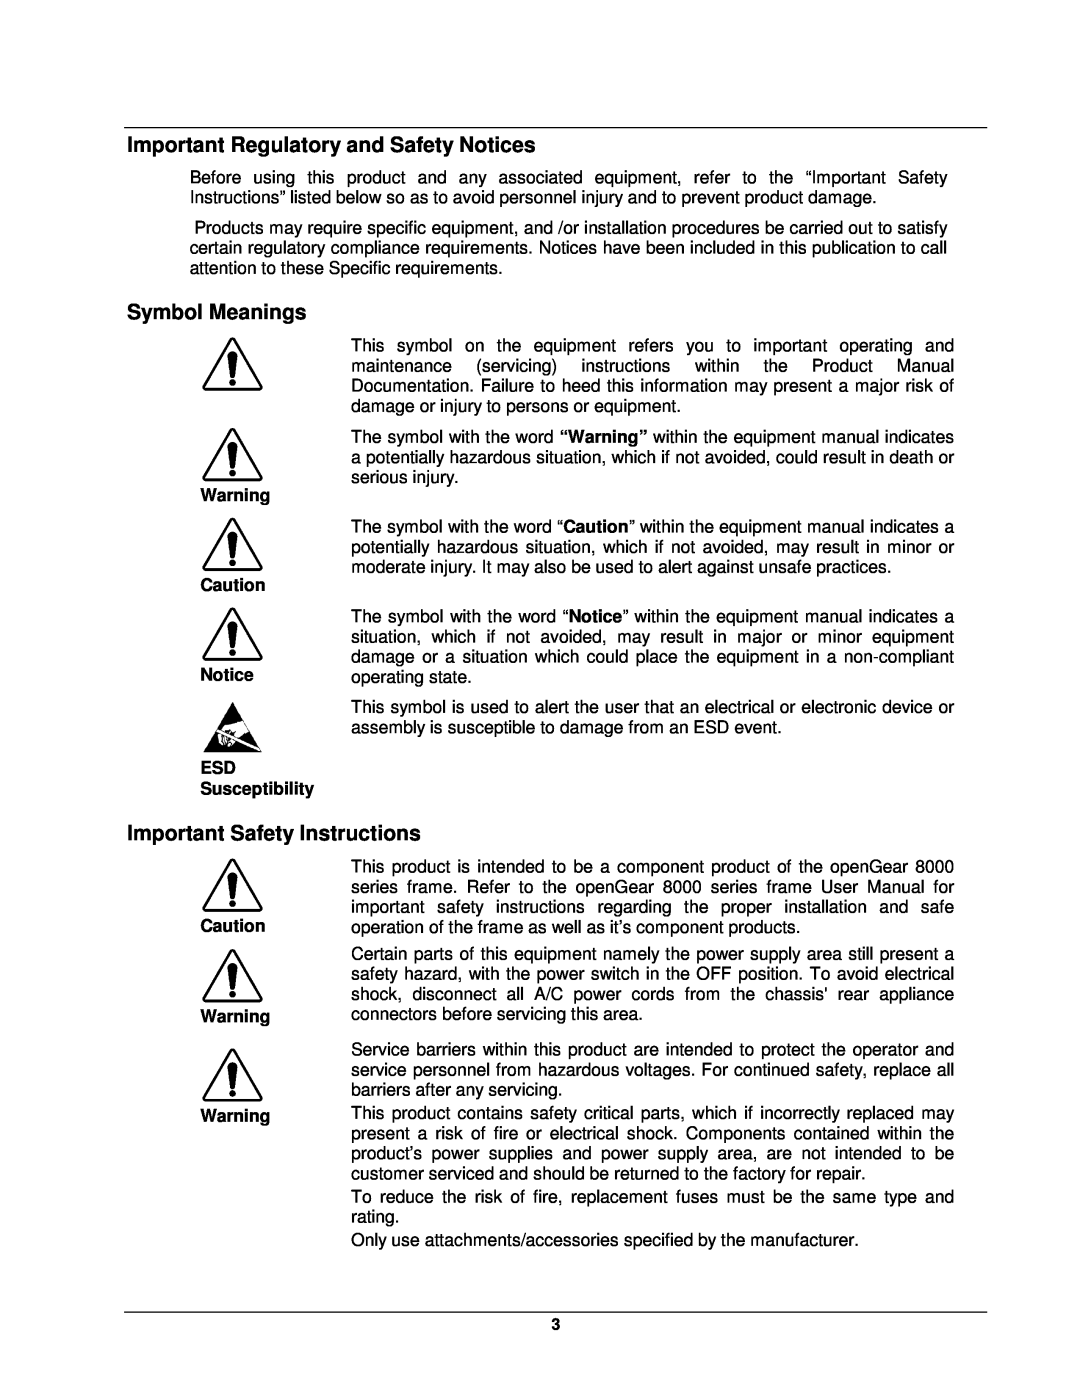 Cobalt Networks 9252 user manual Important Regulatory and Safety Notices, Symbol Meanings, Important Safety Instructions 